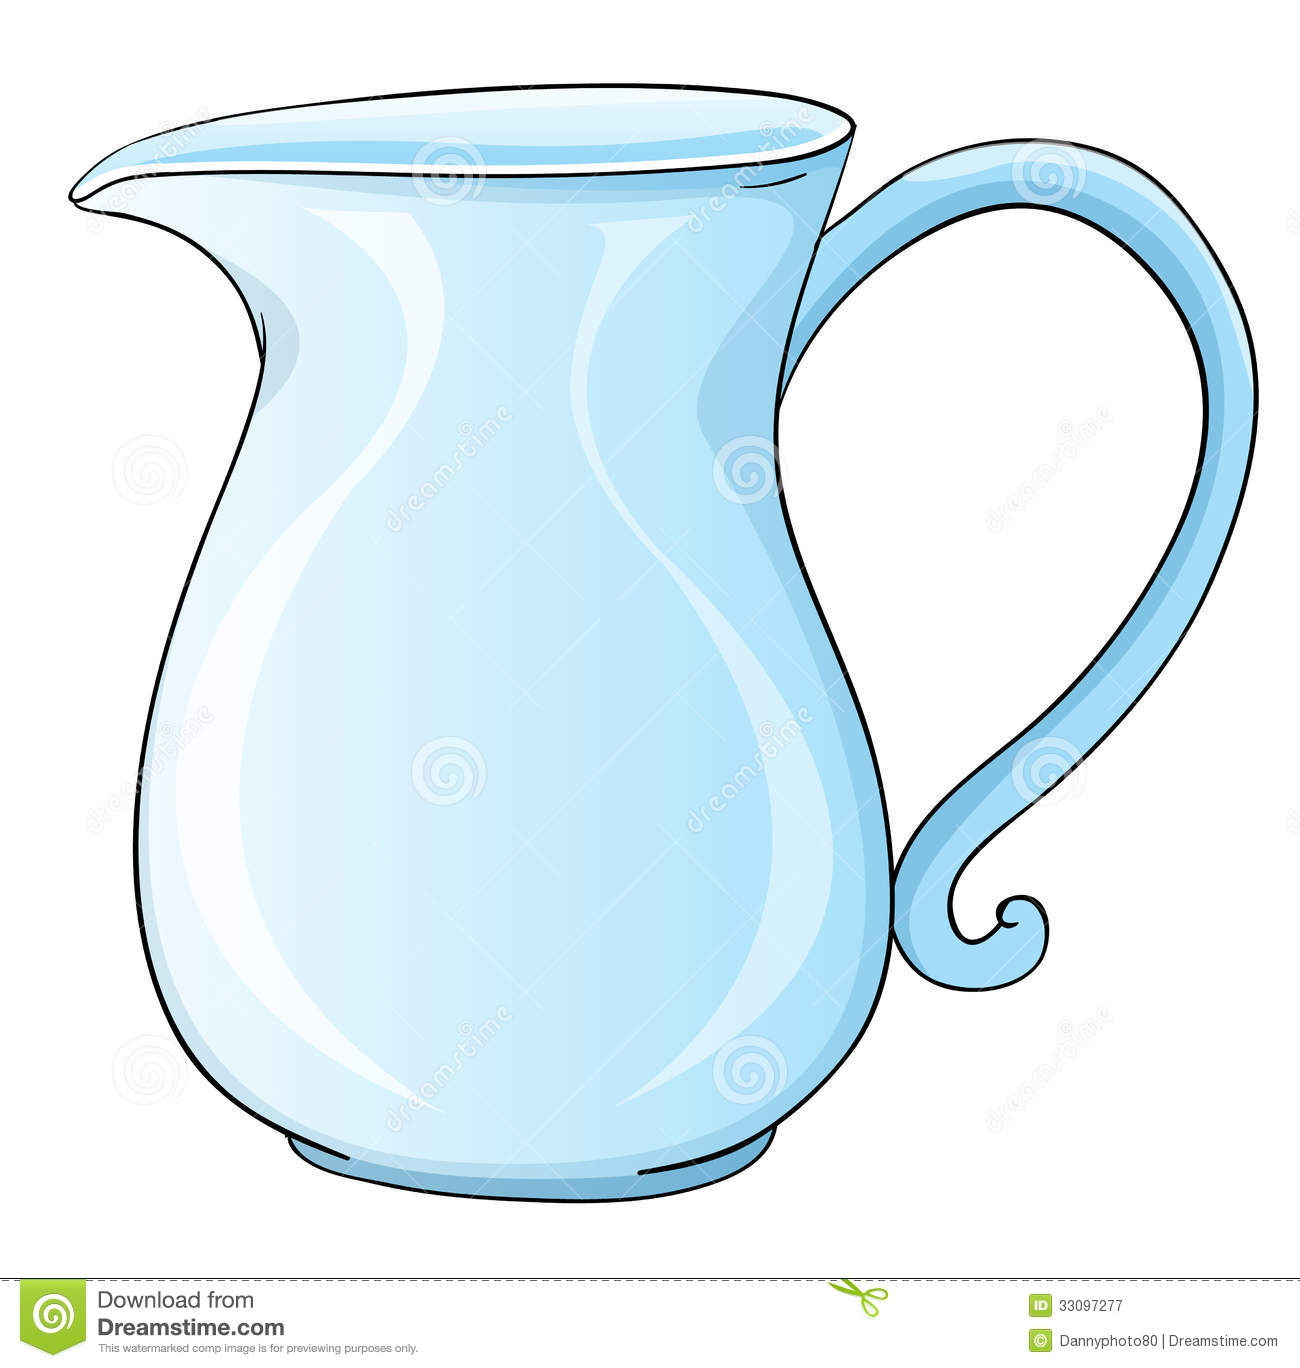 Pitcher clipart #10, Download drawings